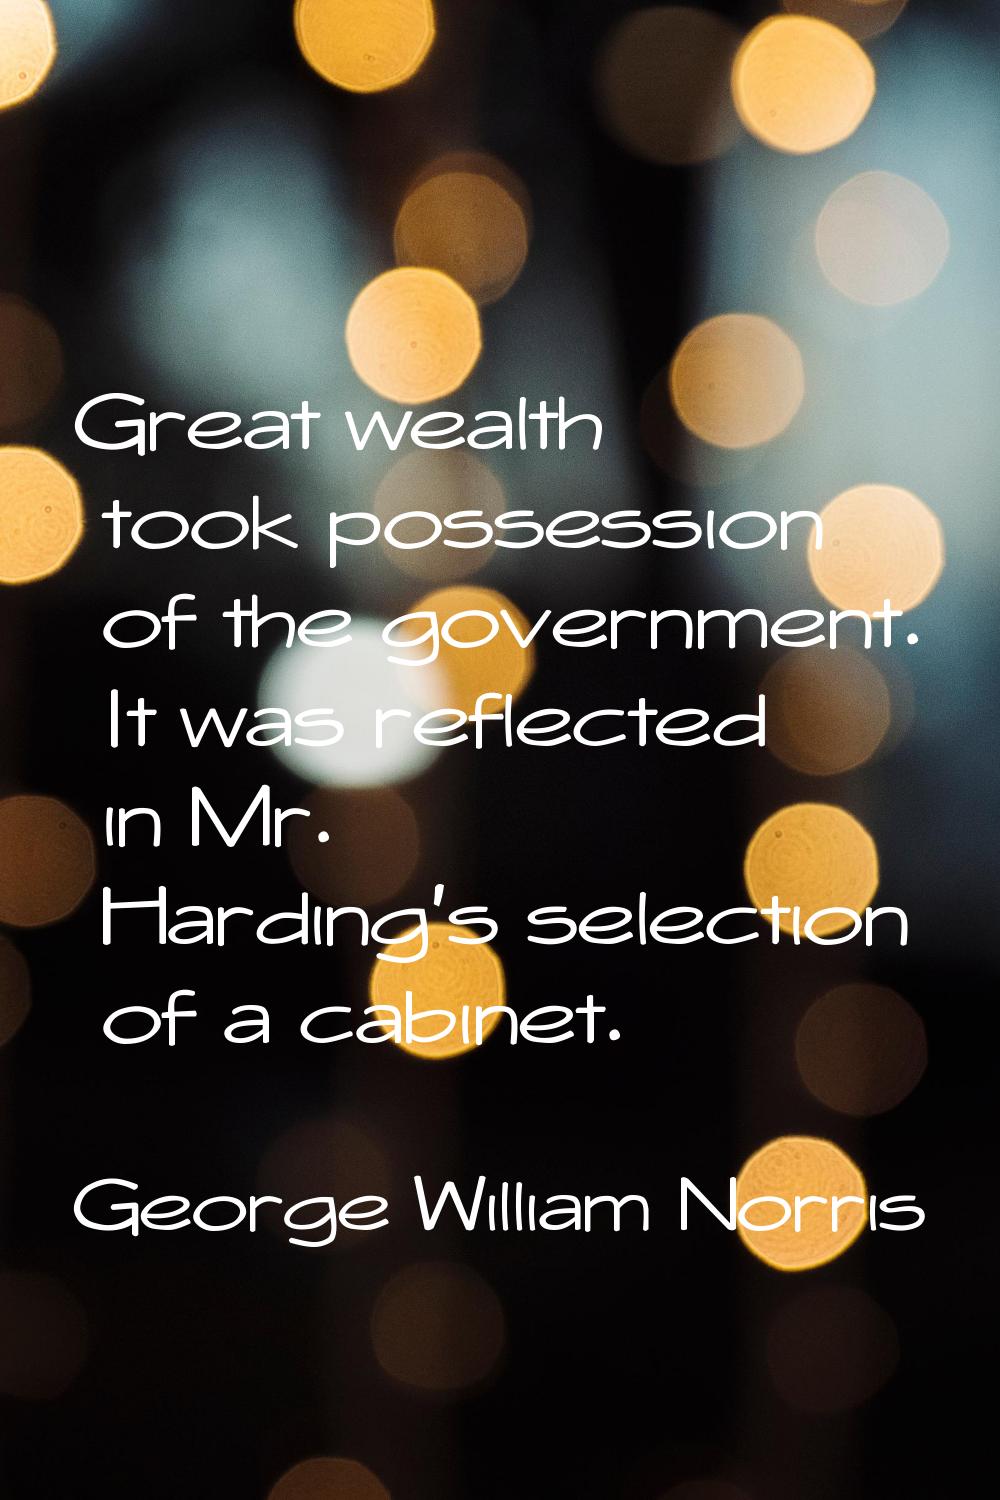 Great wealth took possession of the government. It was reflected in Mr. Harding's selection of a ca